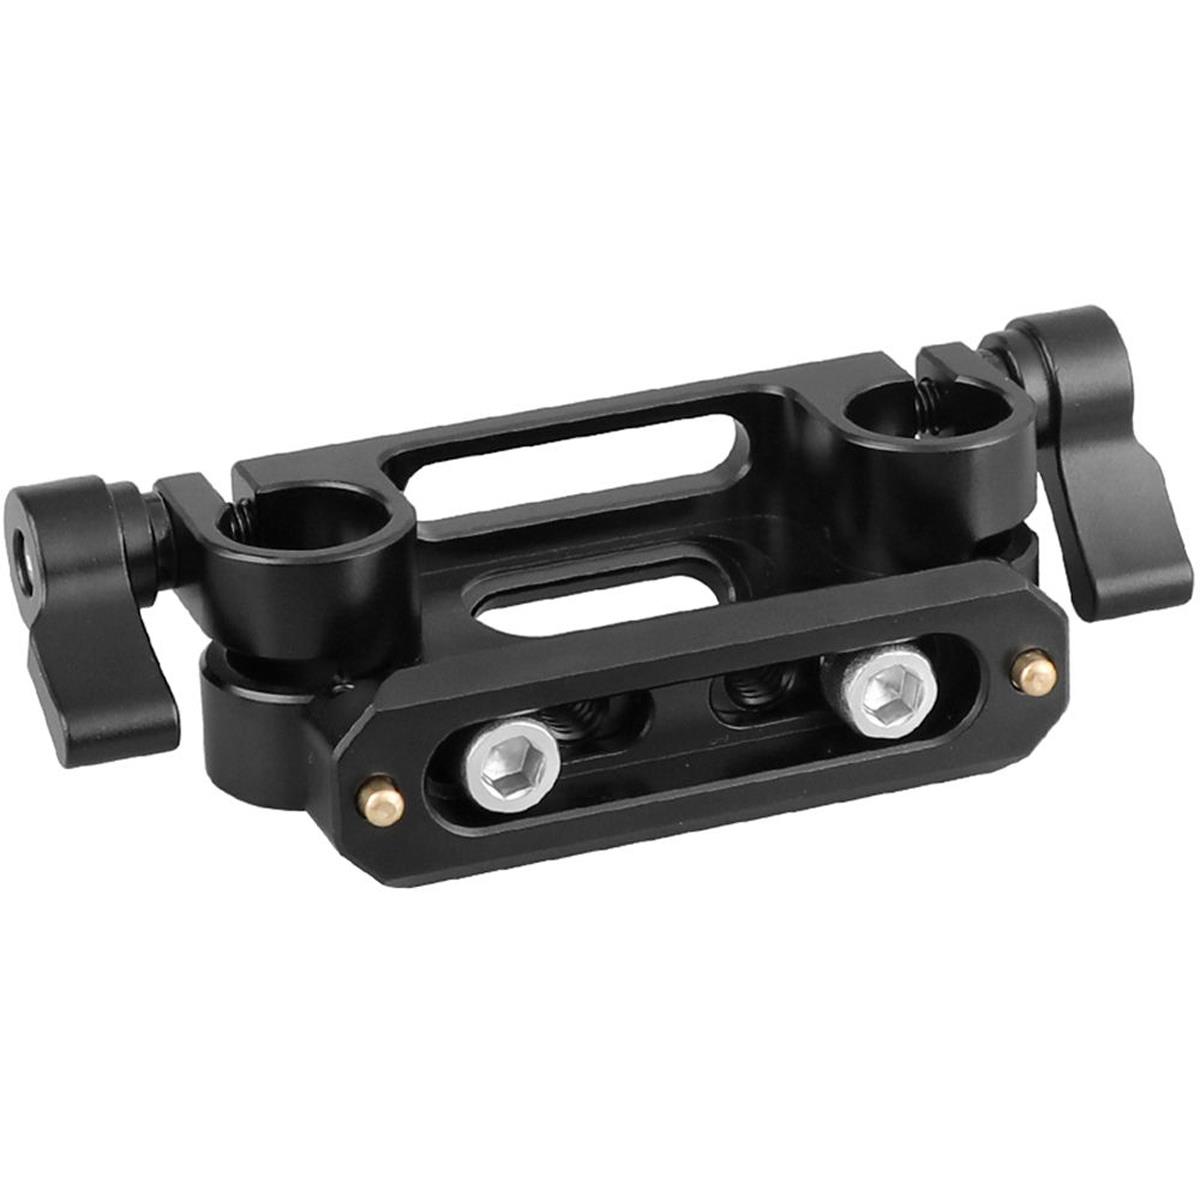 

CAMVATE 15mm Dual Rod Clamp with 70mm NATO Safety Rail